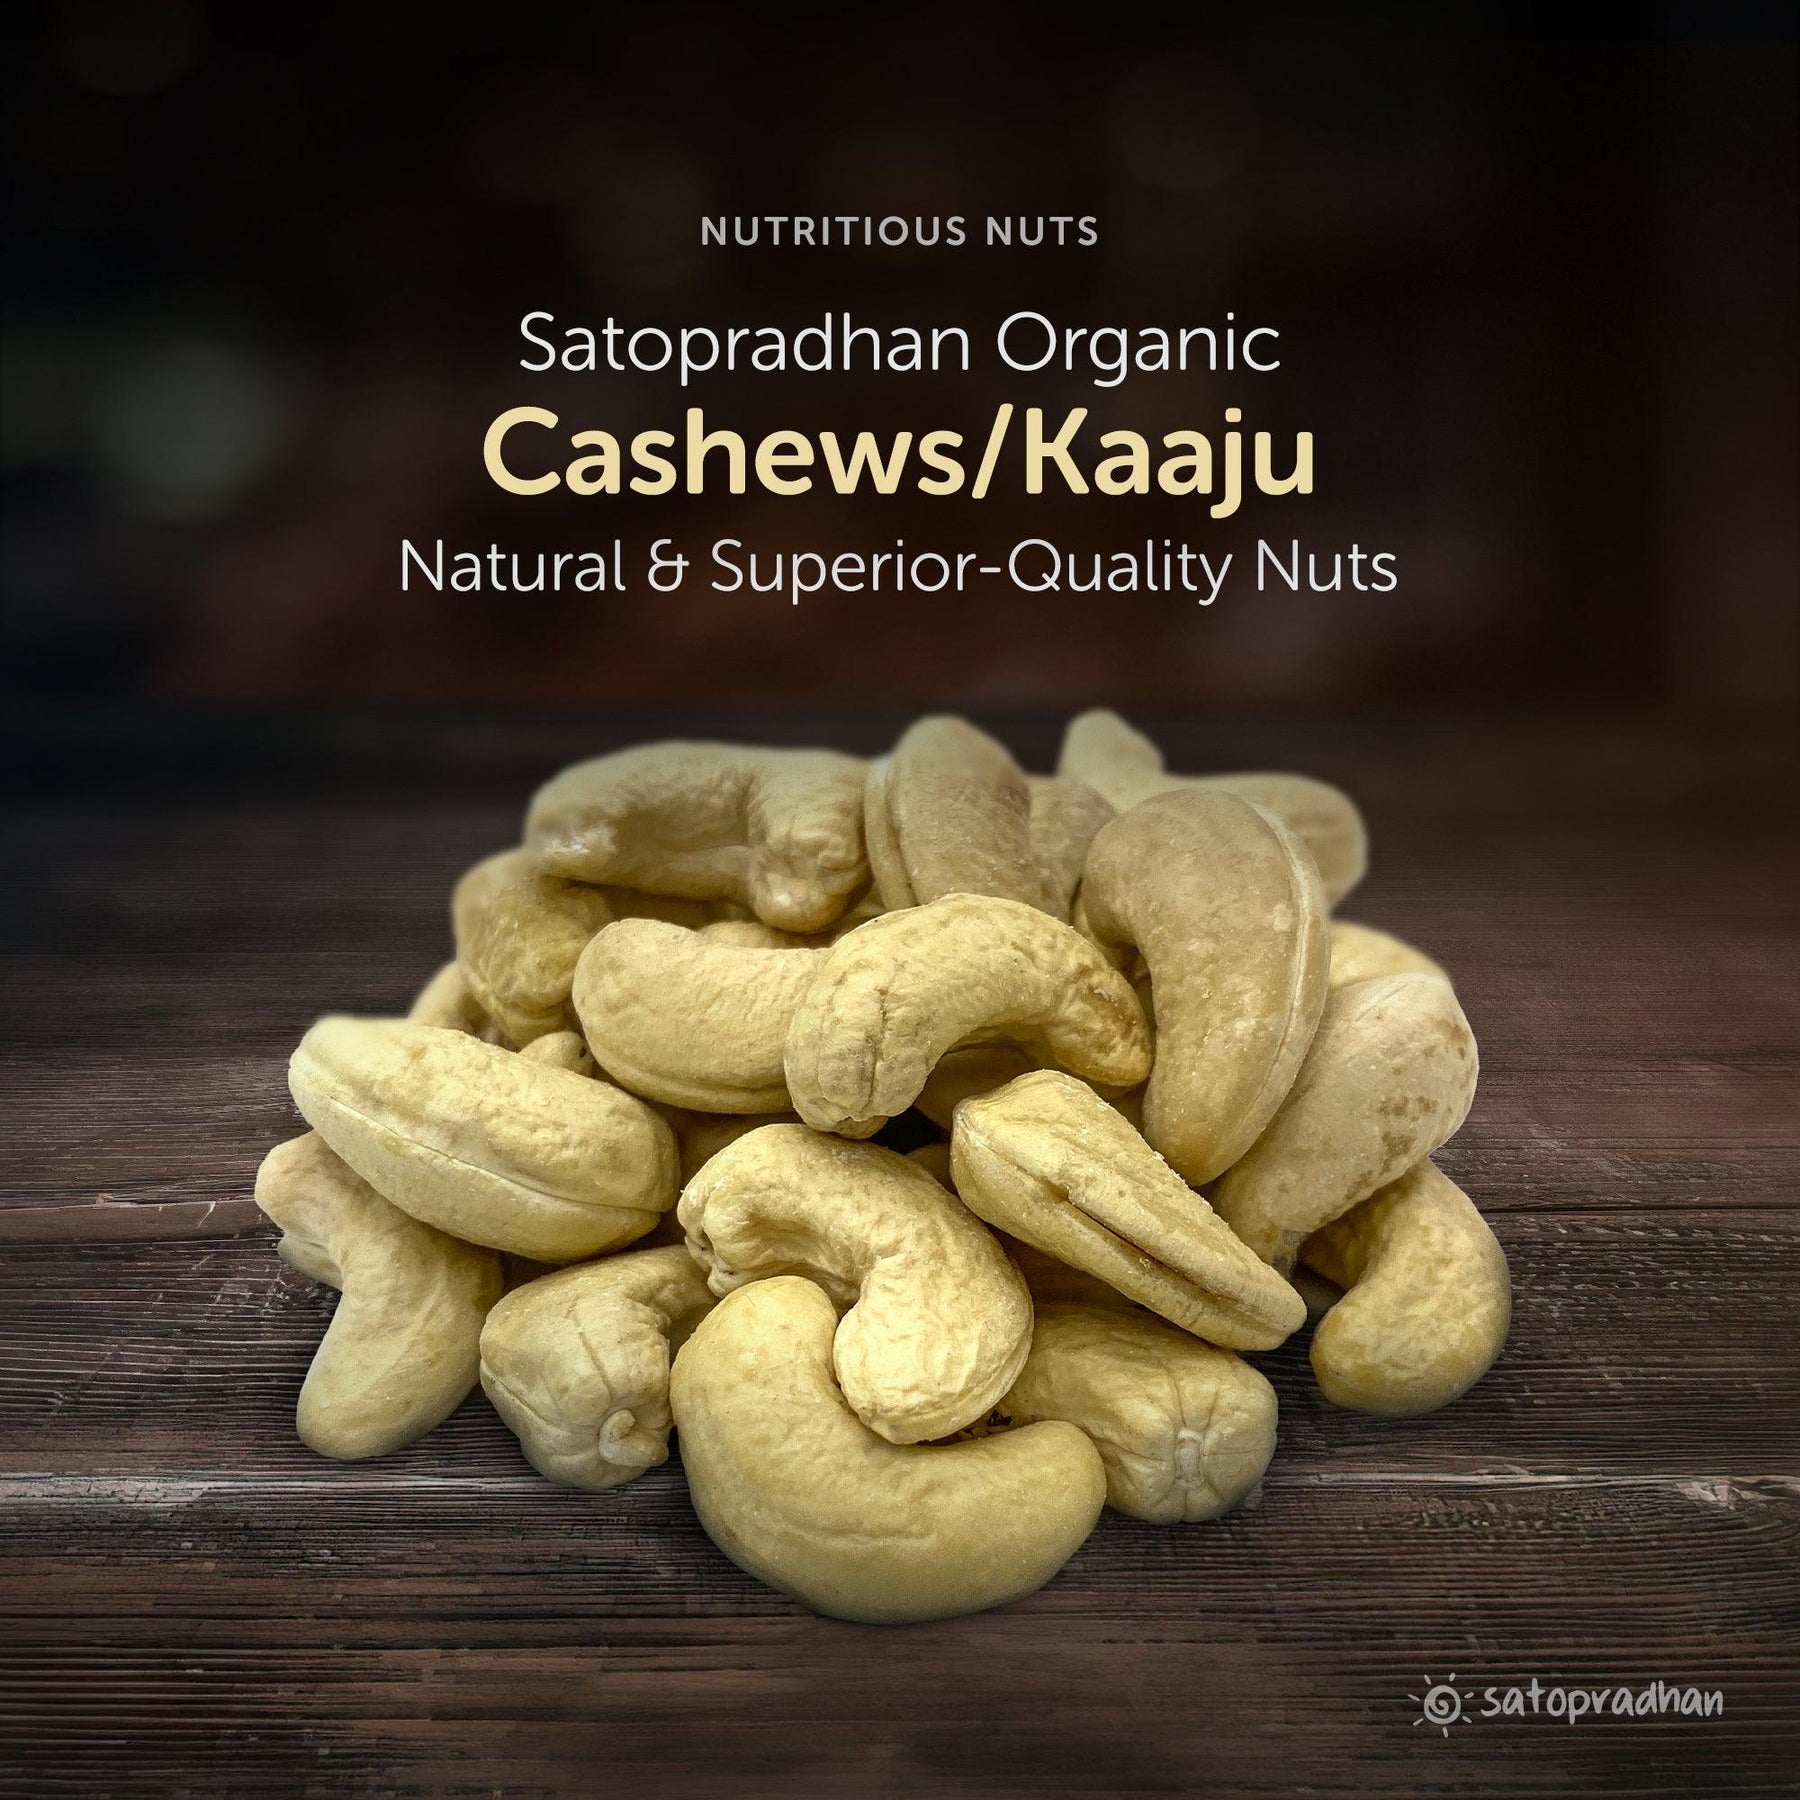 Cashew Nuts Whole - Kaaju 200g - Raw Unsalted Premium Quality & Organic nuts without Additives or Preservatives - Satopradhan